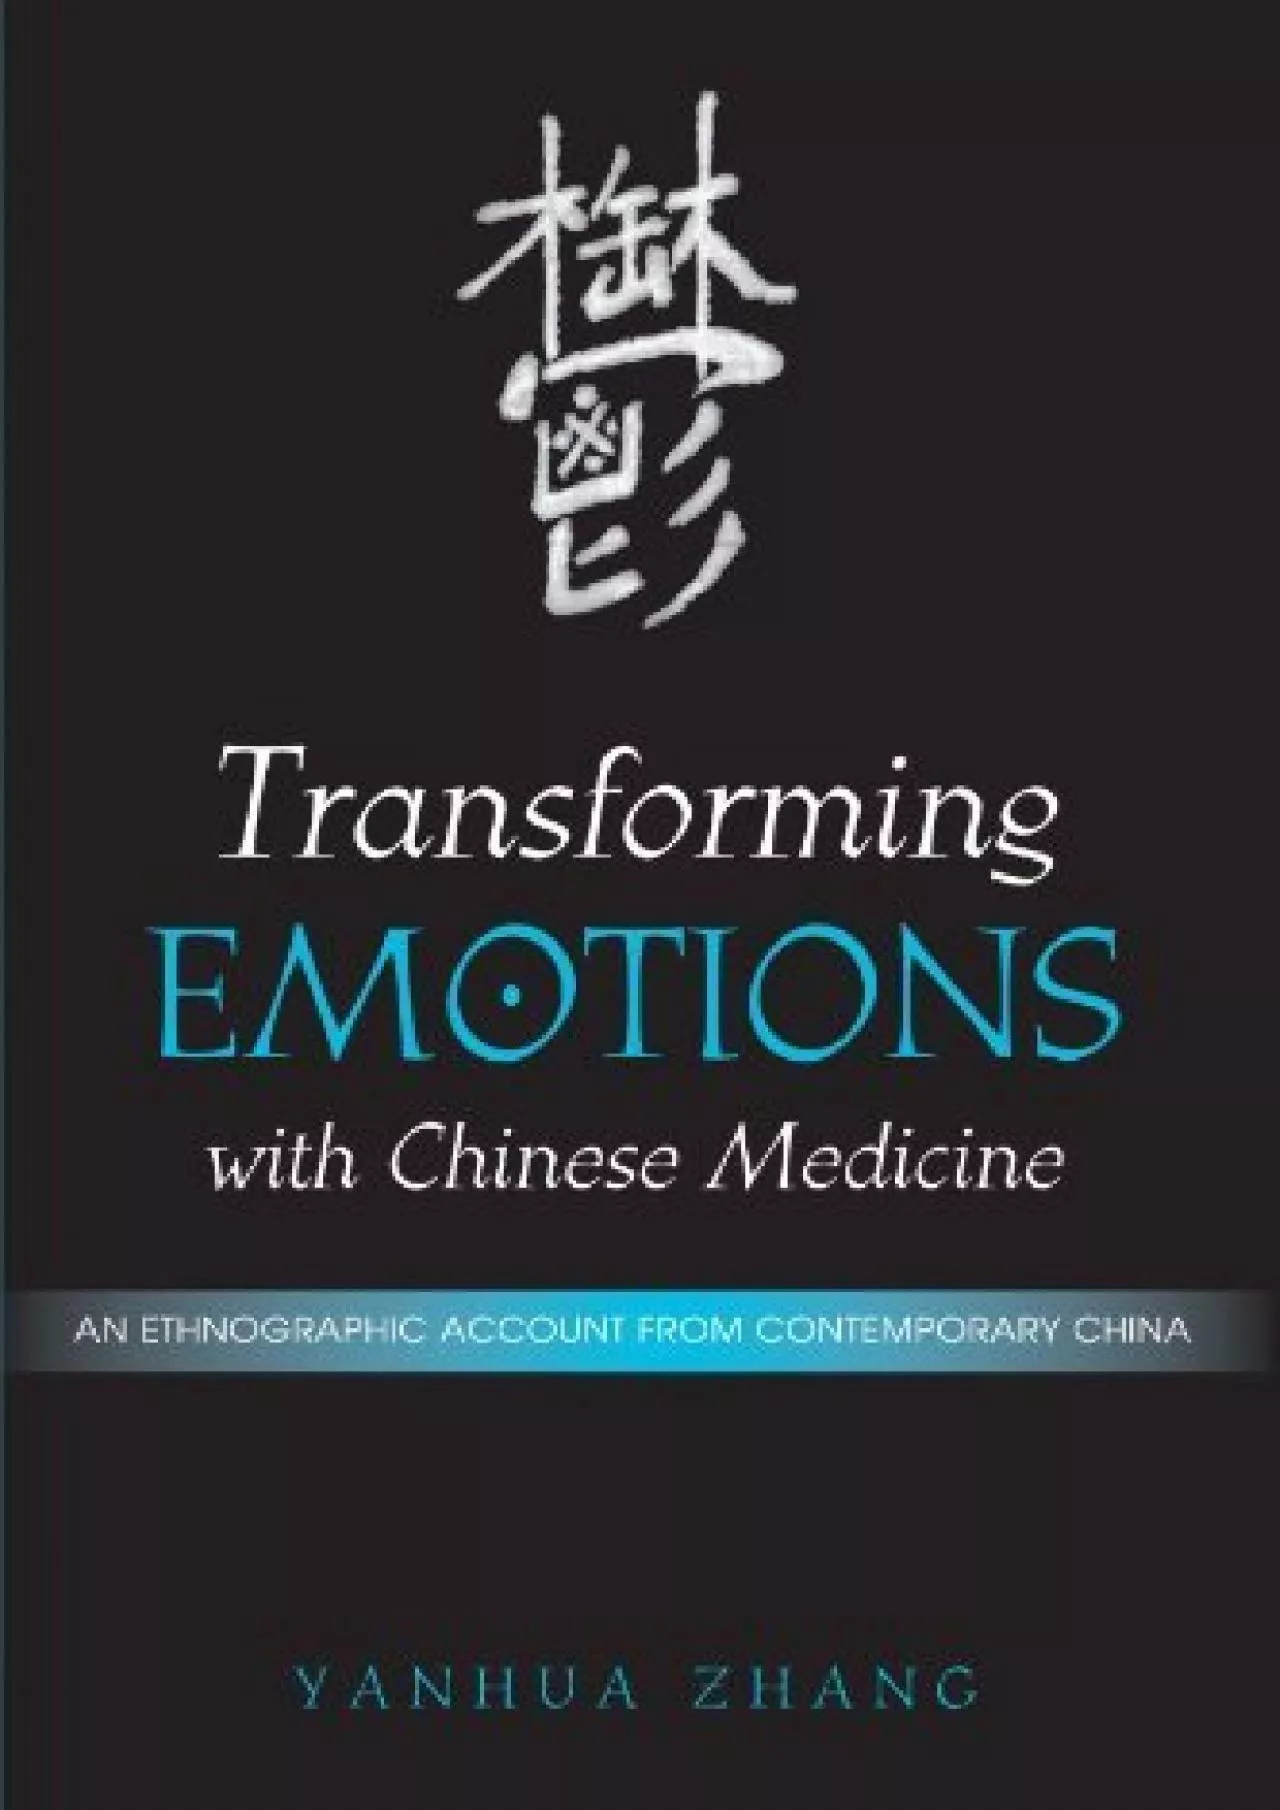 (BOOS)-Transforming Emotions with Chinese Medicine: An Ethnographic Account from Contemporary